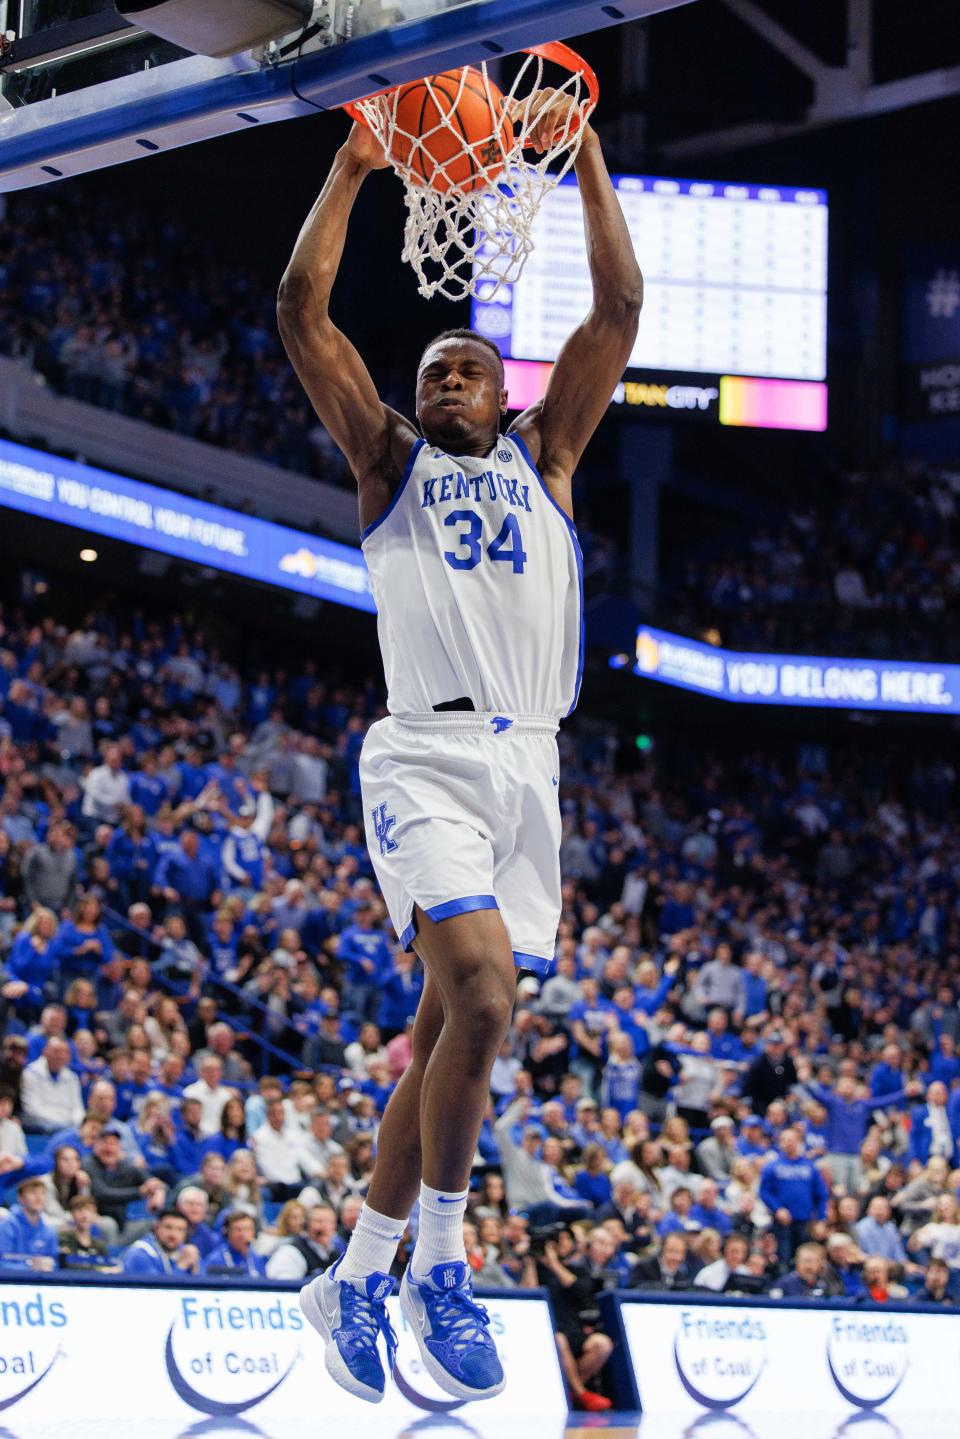 Feb 25, 2023; Lexington, Kentucky, USA; Kentucky Wildcats forward Oscar Tshiebwe (34) dunks the ball during the second half against the Auburn Tigers at Rupp Arena at Central Bank Center. Mandatory Credit: Jordan Prather-USA TODAY Sports